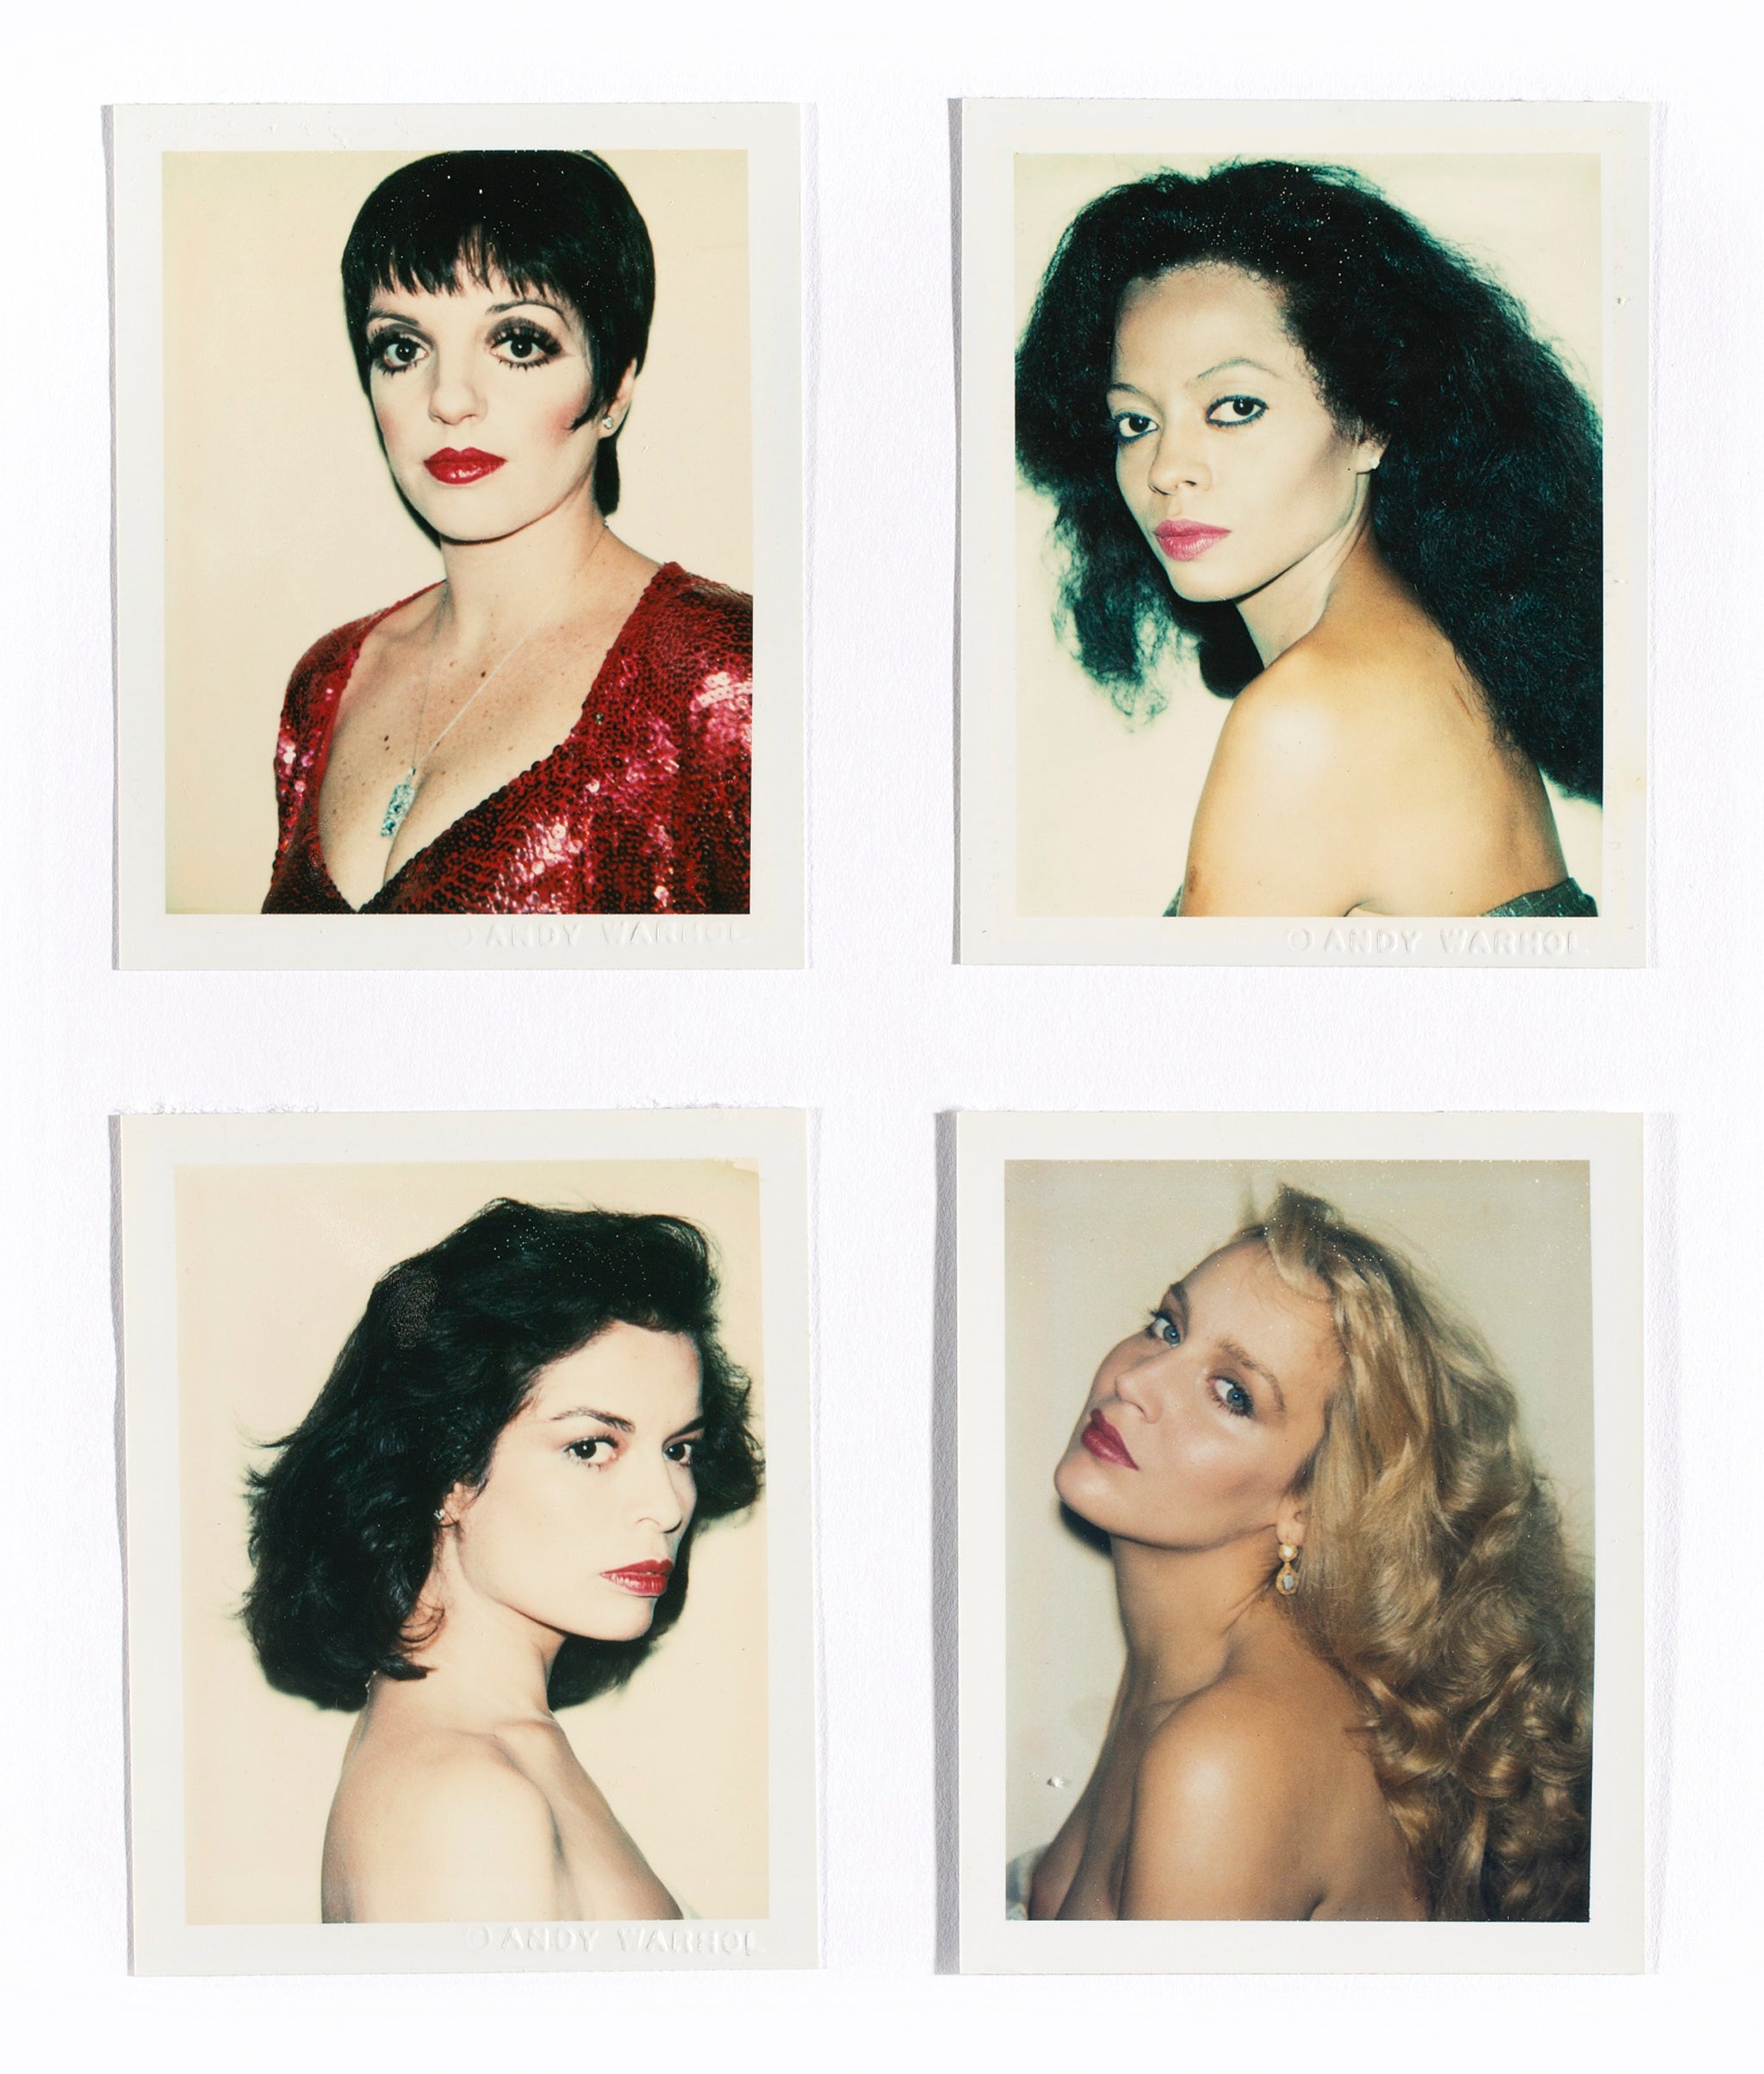 Portraits of Liza Minnelli, Diana Ross and Mick Jagger’s ex-wives Jerry Hall and Bianca Jagger by Andy Warhol